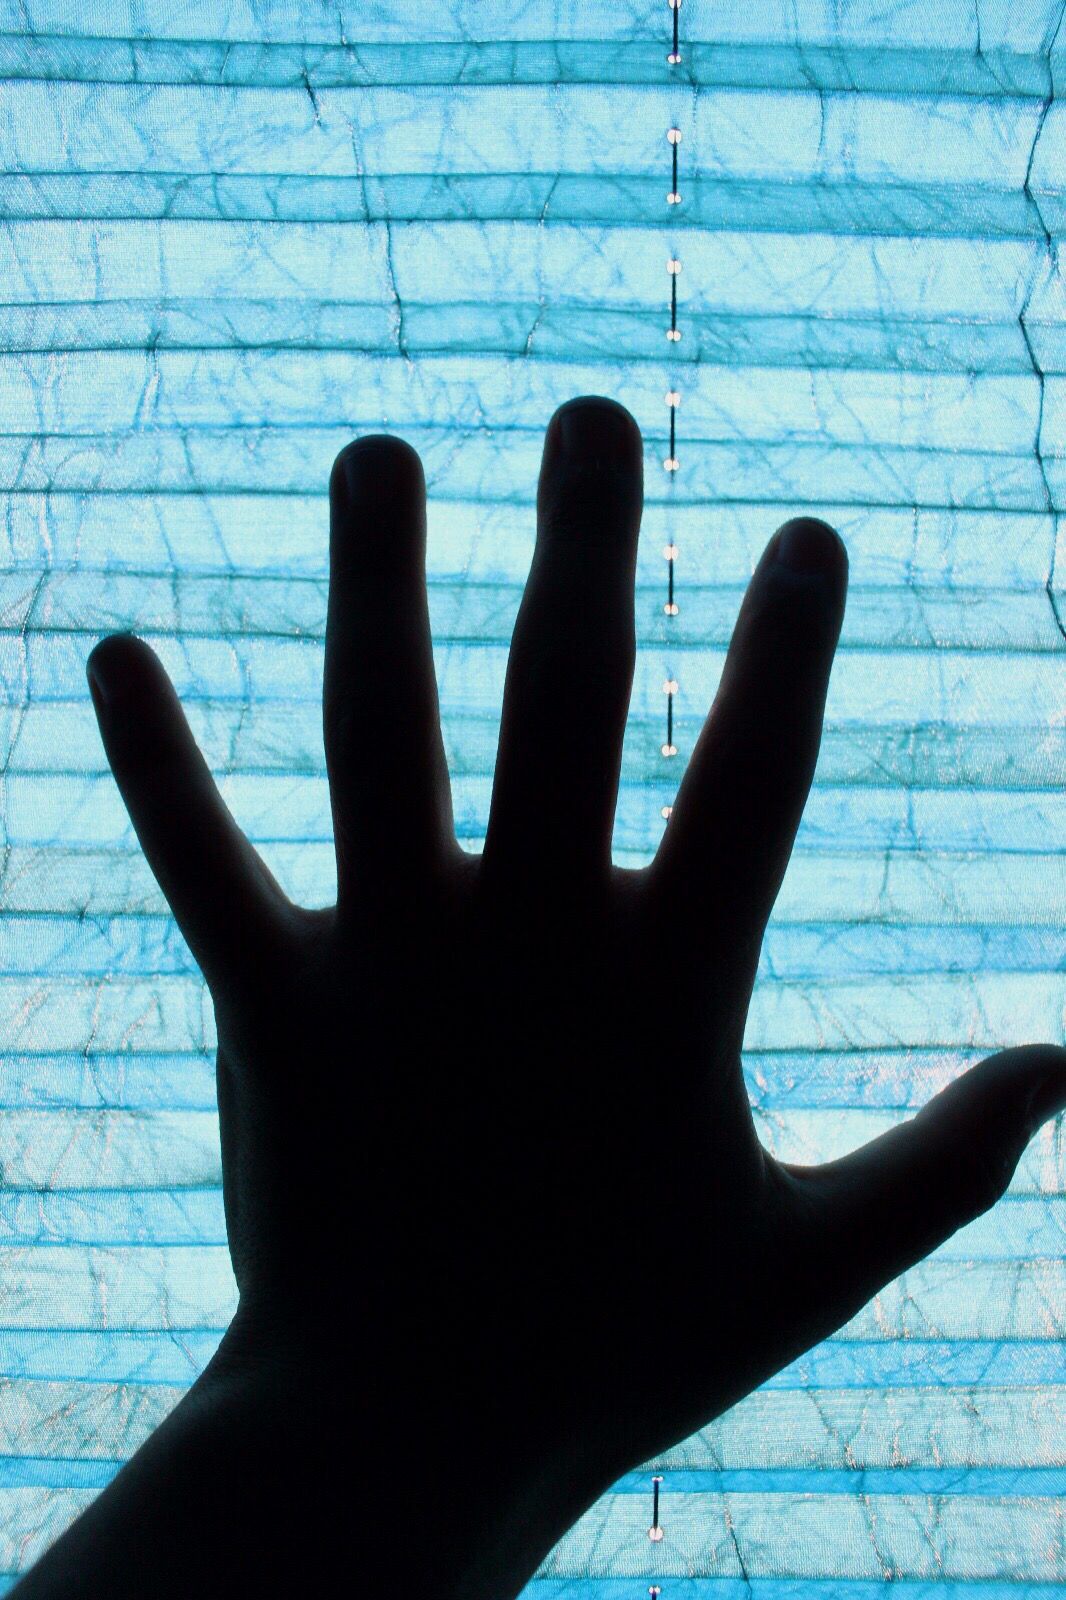 CLOSE-UP OF SILHOUETTE PERSON HAND ON GLASS